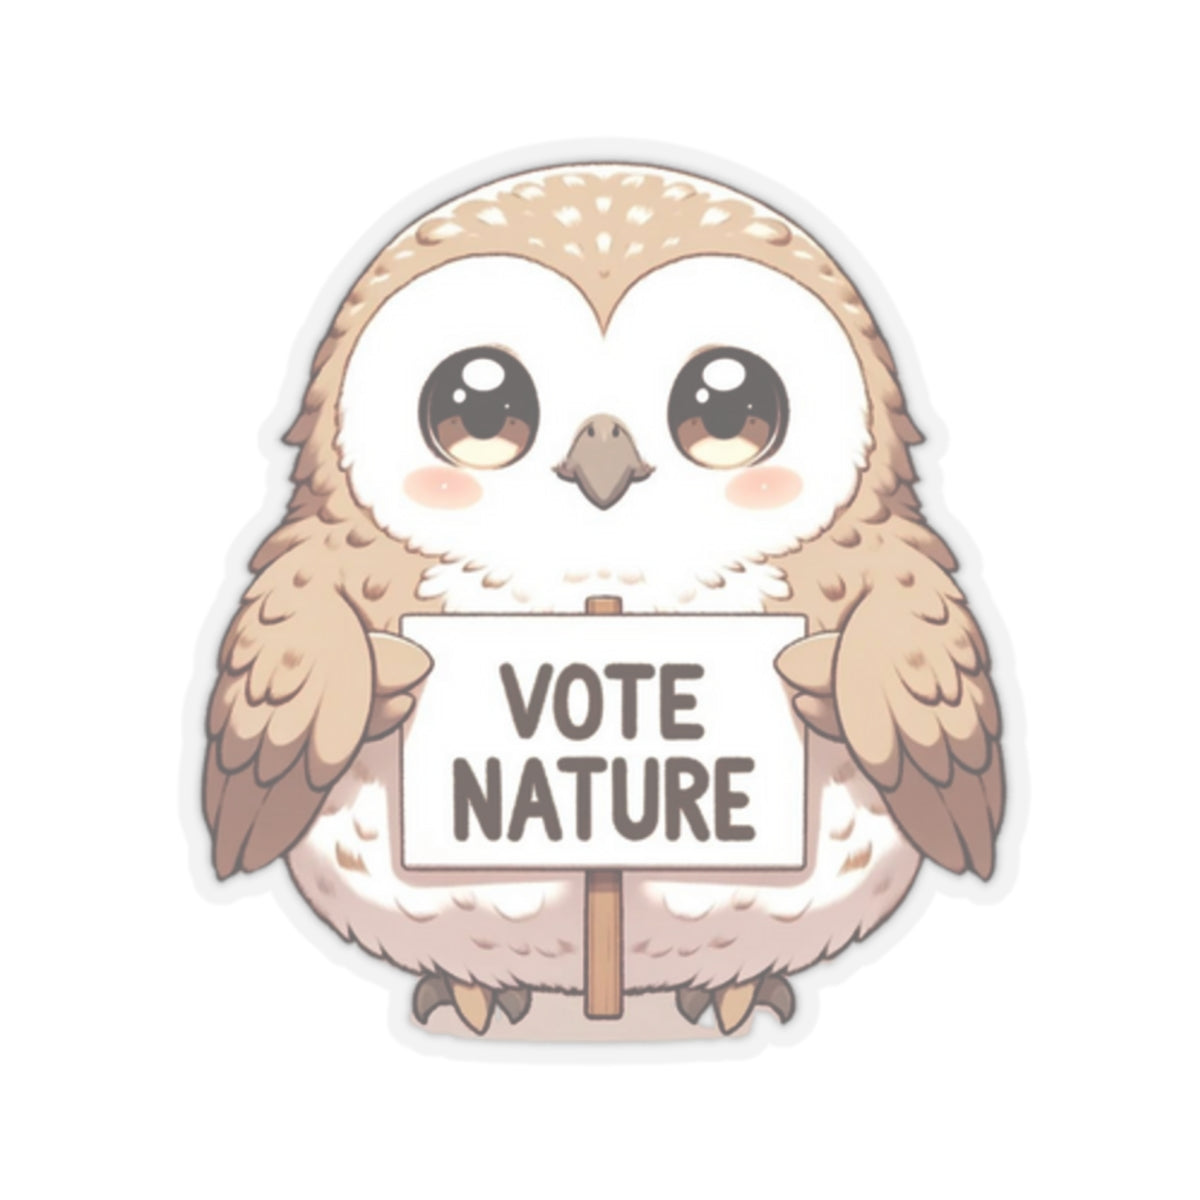 Inspirational Cute Owl Statement vinyl Sticker: Vote Nature! for laptop, kindle, phone, ipad, instrument case, notebook, mood board, or wall